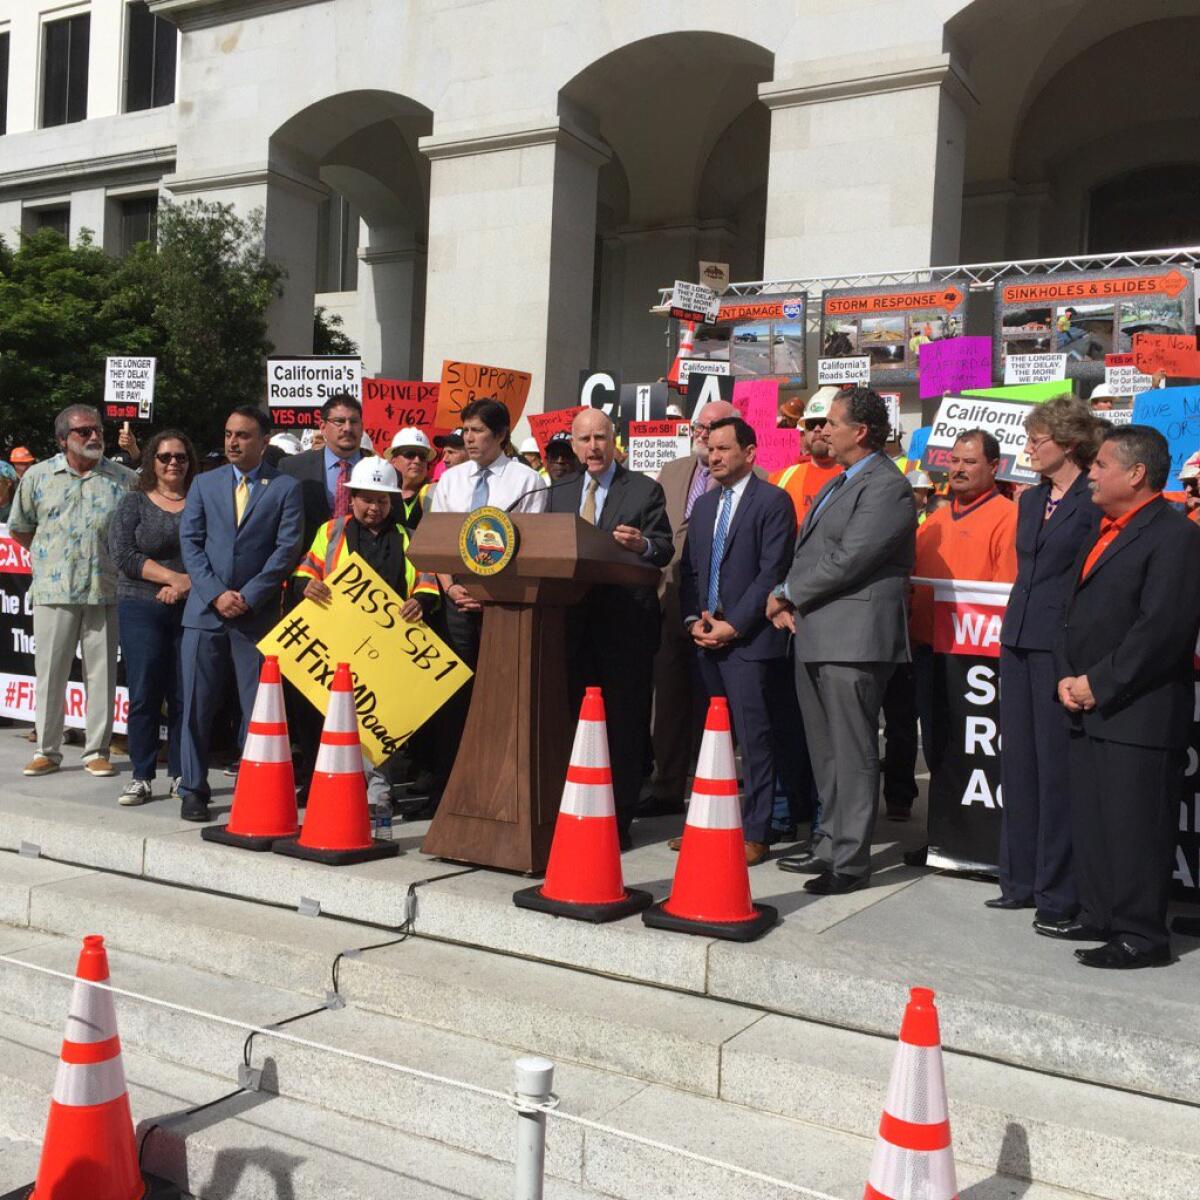 Gov. Jerry Brown and legislative leaders gathered outside the Capitol in Sacramento to make a last public appeal for support on the eve of a possible vote on a gas tax increase to repair roads.